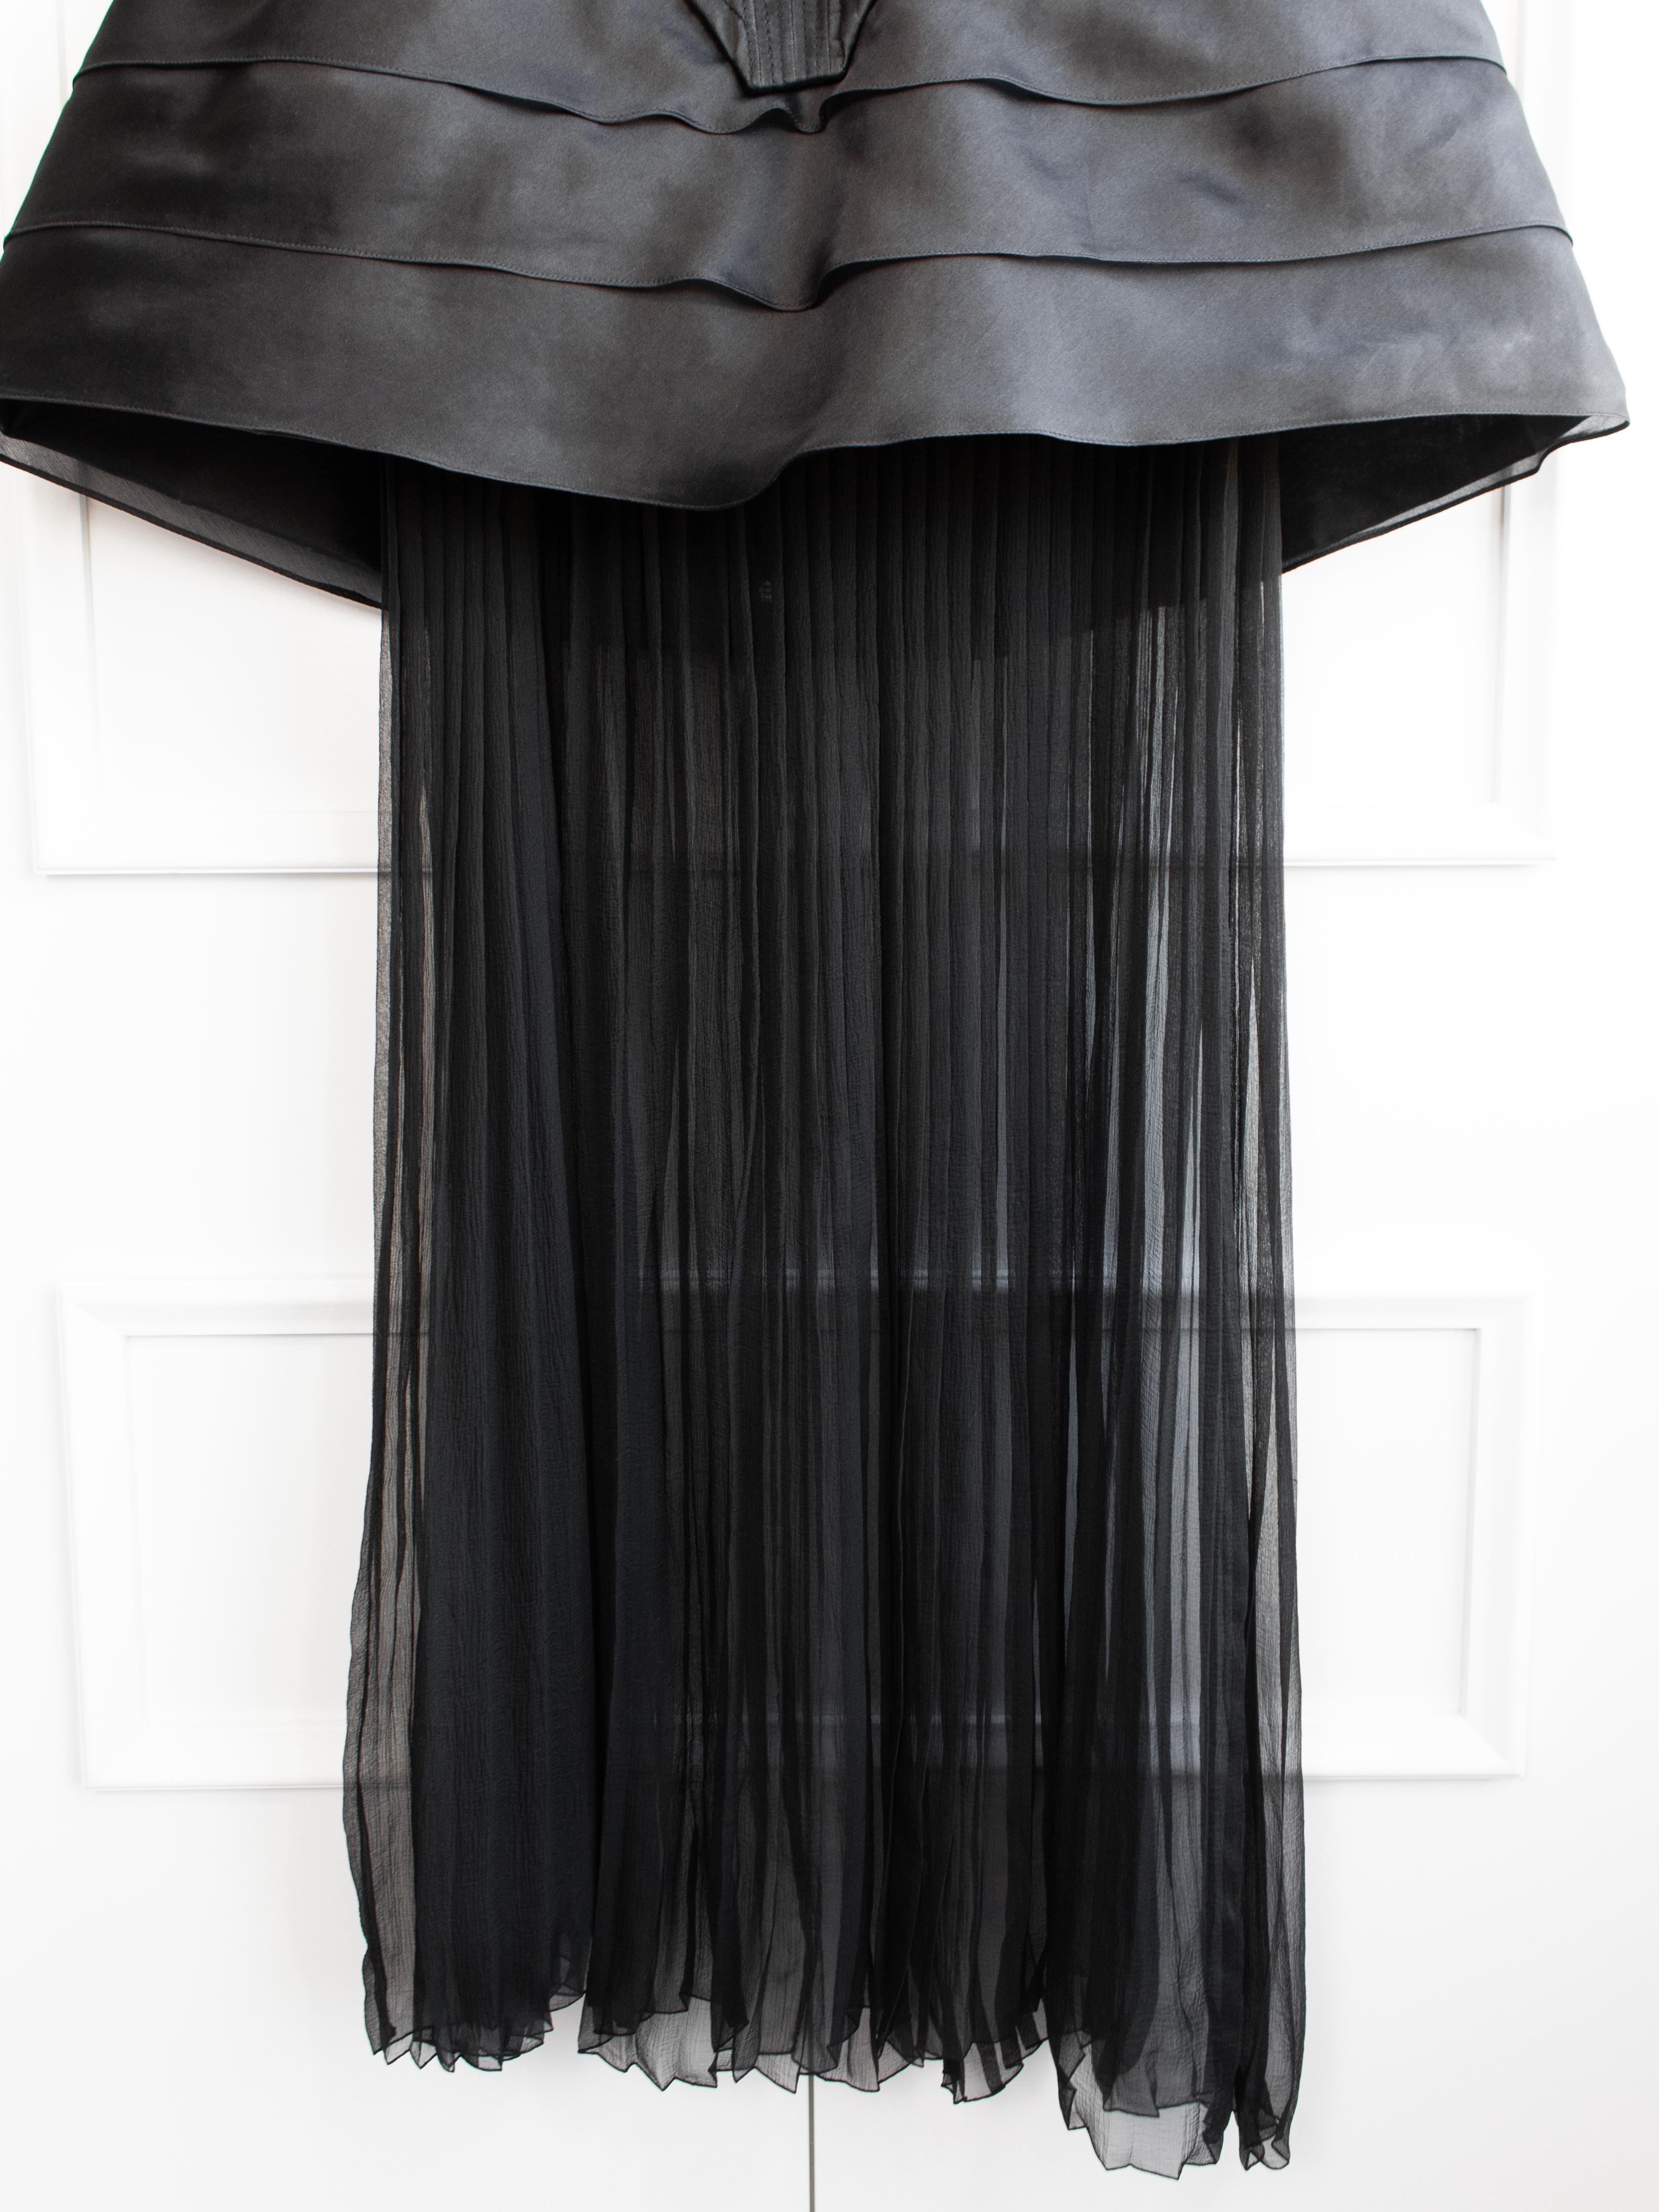 Chanel Vintage Haute Couture Fall/Winter 1992 Black Satin Corset Gown Dress For Sale 7